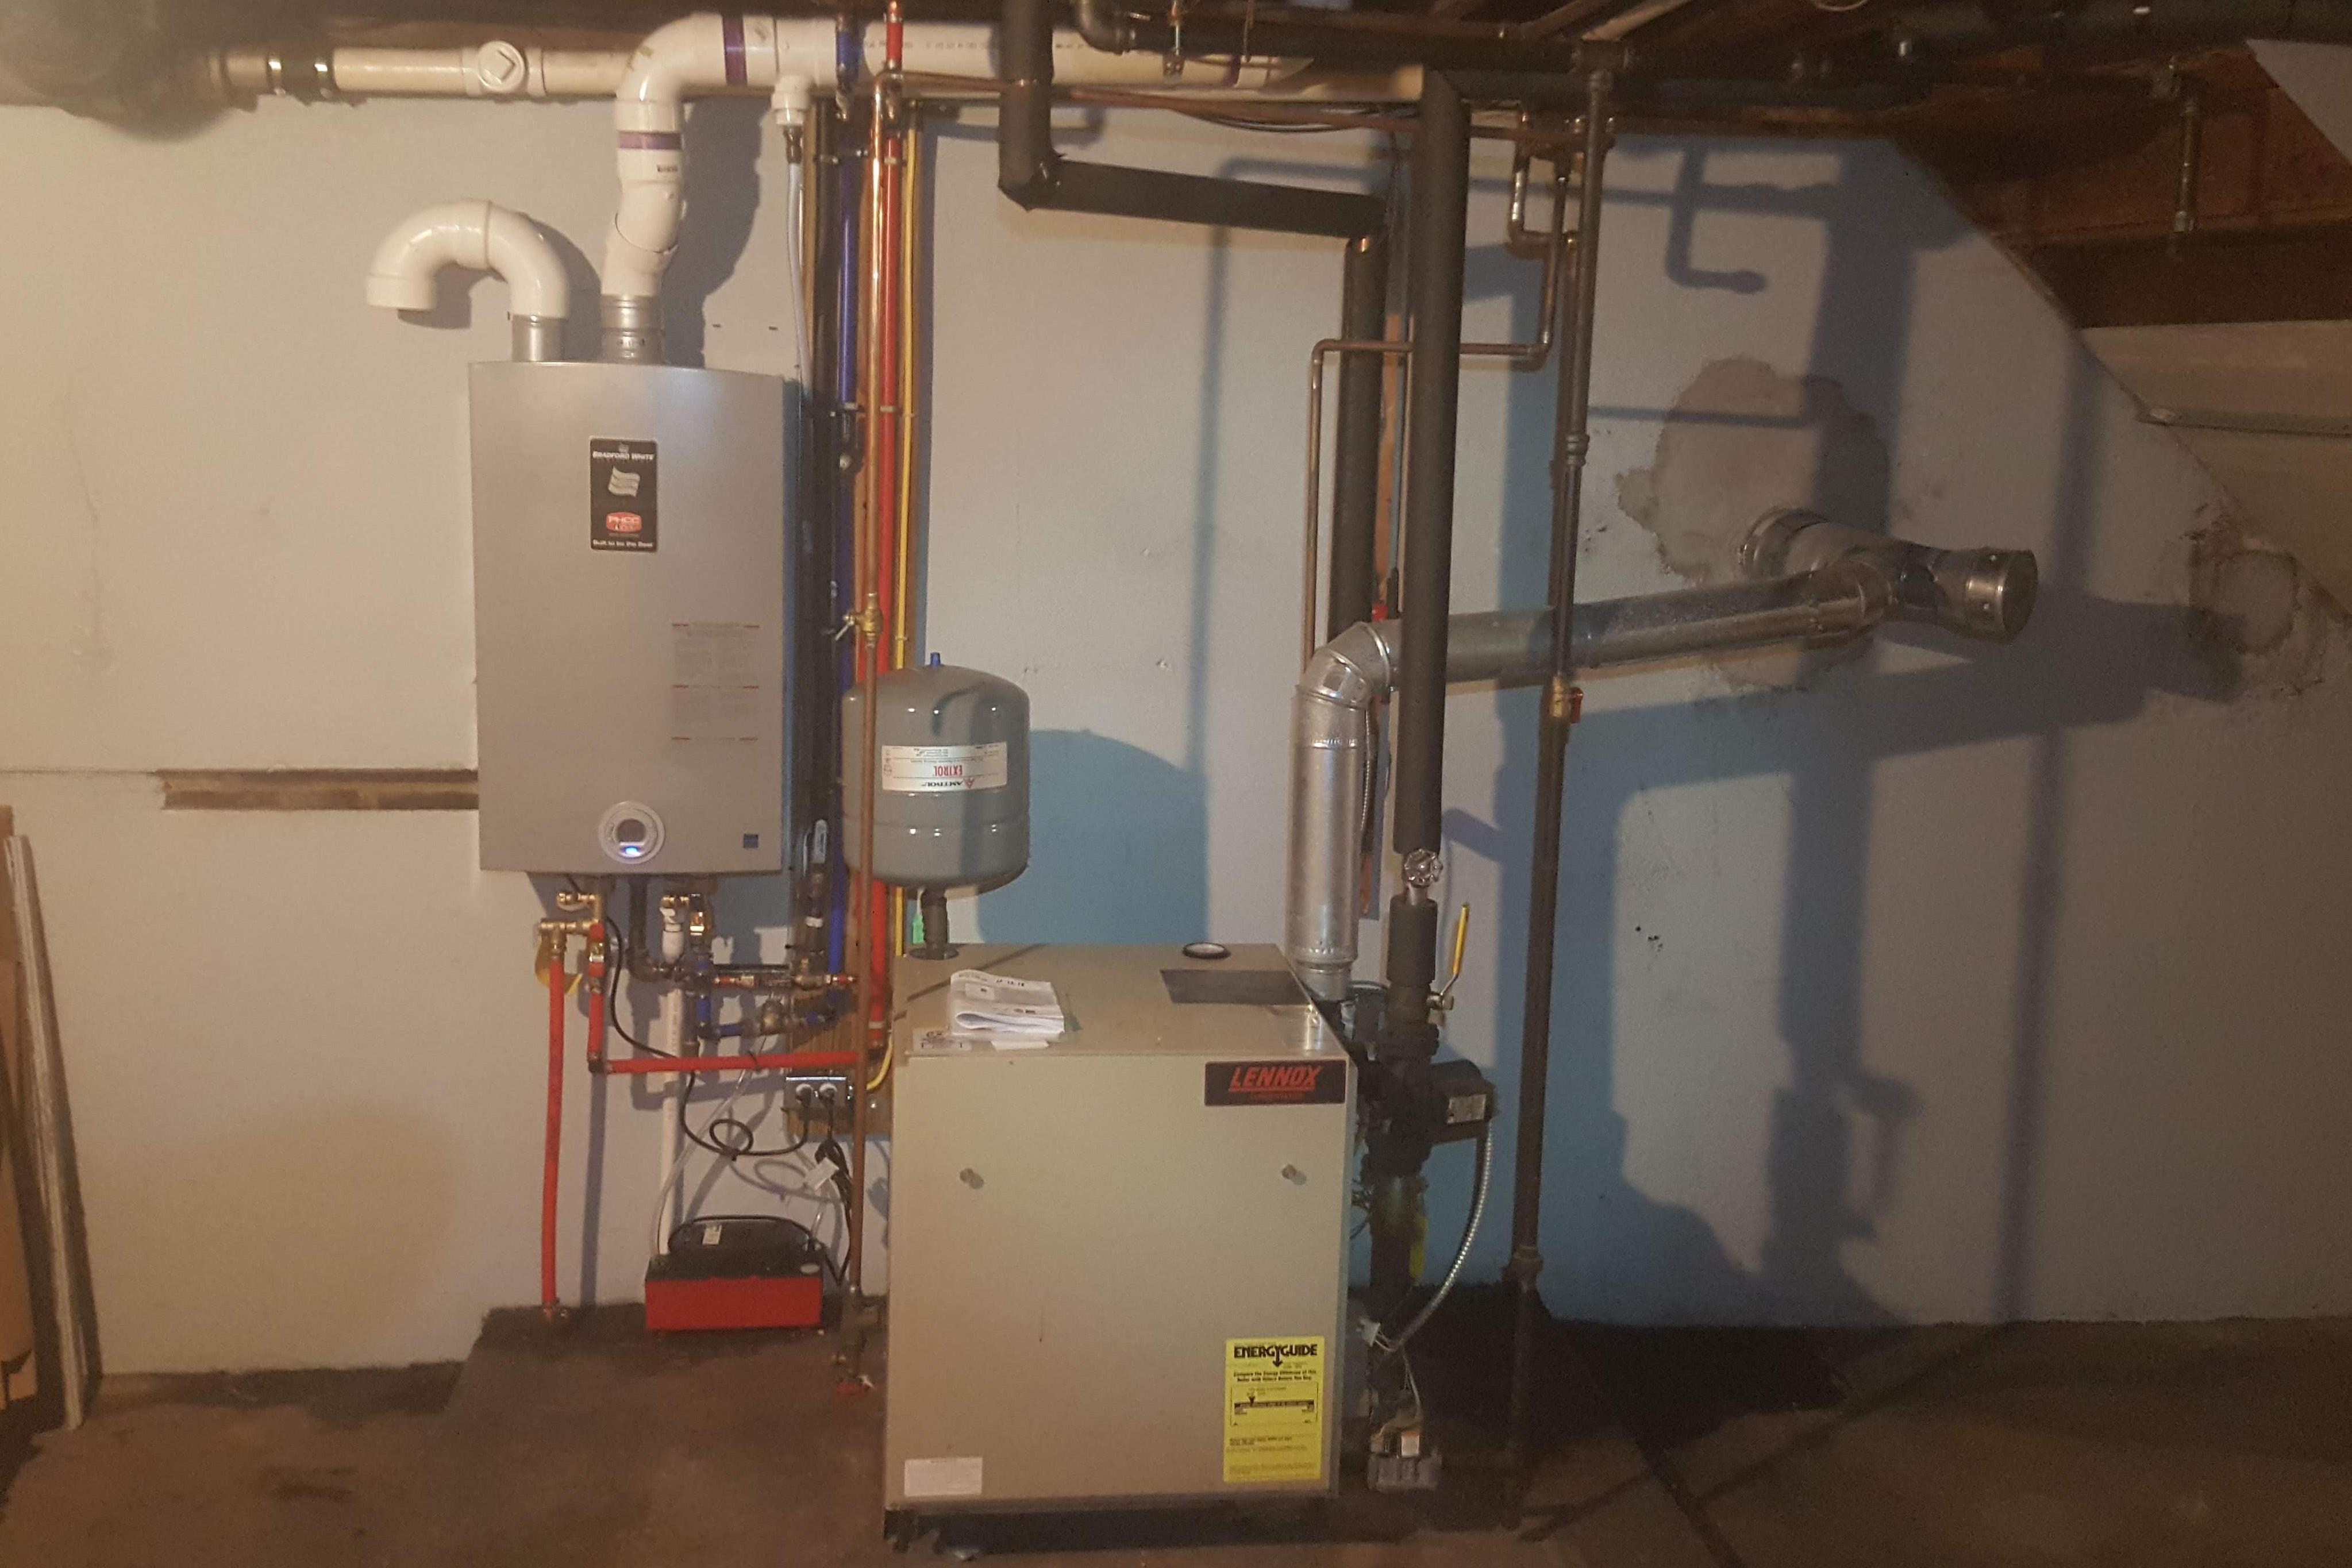 Tankless hot water system installation by Applause Plumbing and Heating in Easton, PA. Energy-efficient and space-saving solution for continuous hot water. Expert plumbing service for homes in Easton, PA. Contact us for reliable tankless water heater installation and maintenance. 